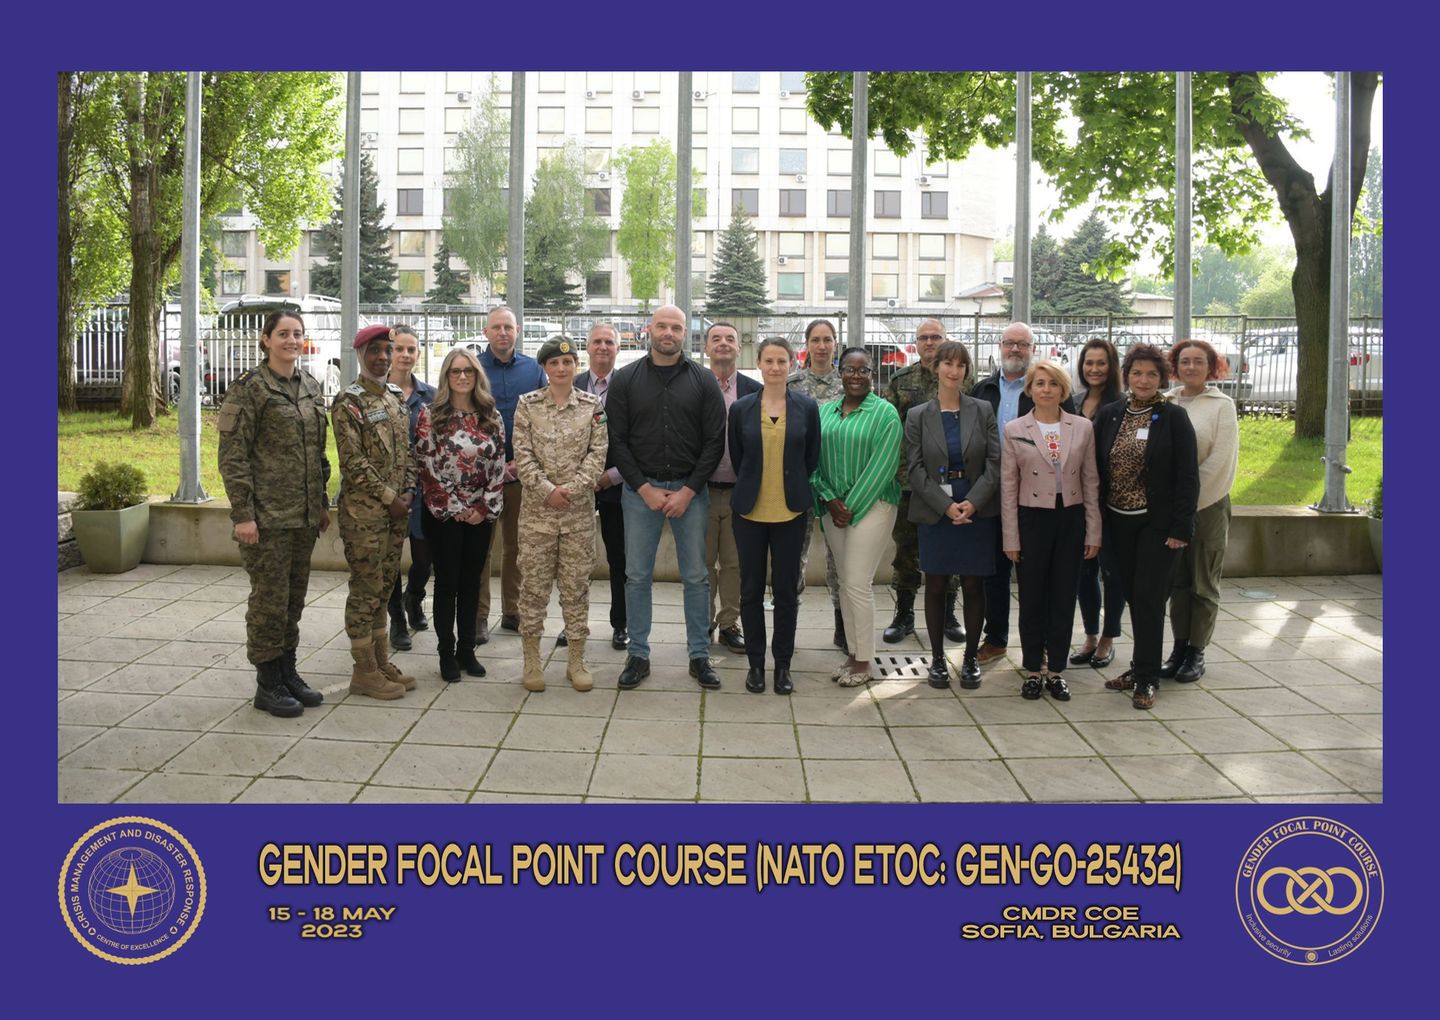 Four days of insightful deliberations and exchange among future Gender Focal Points 